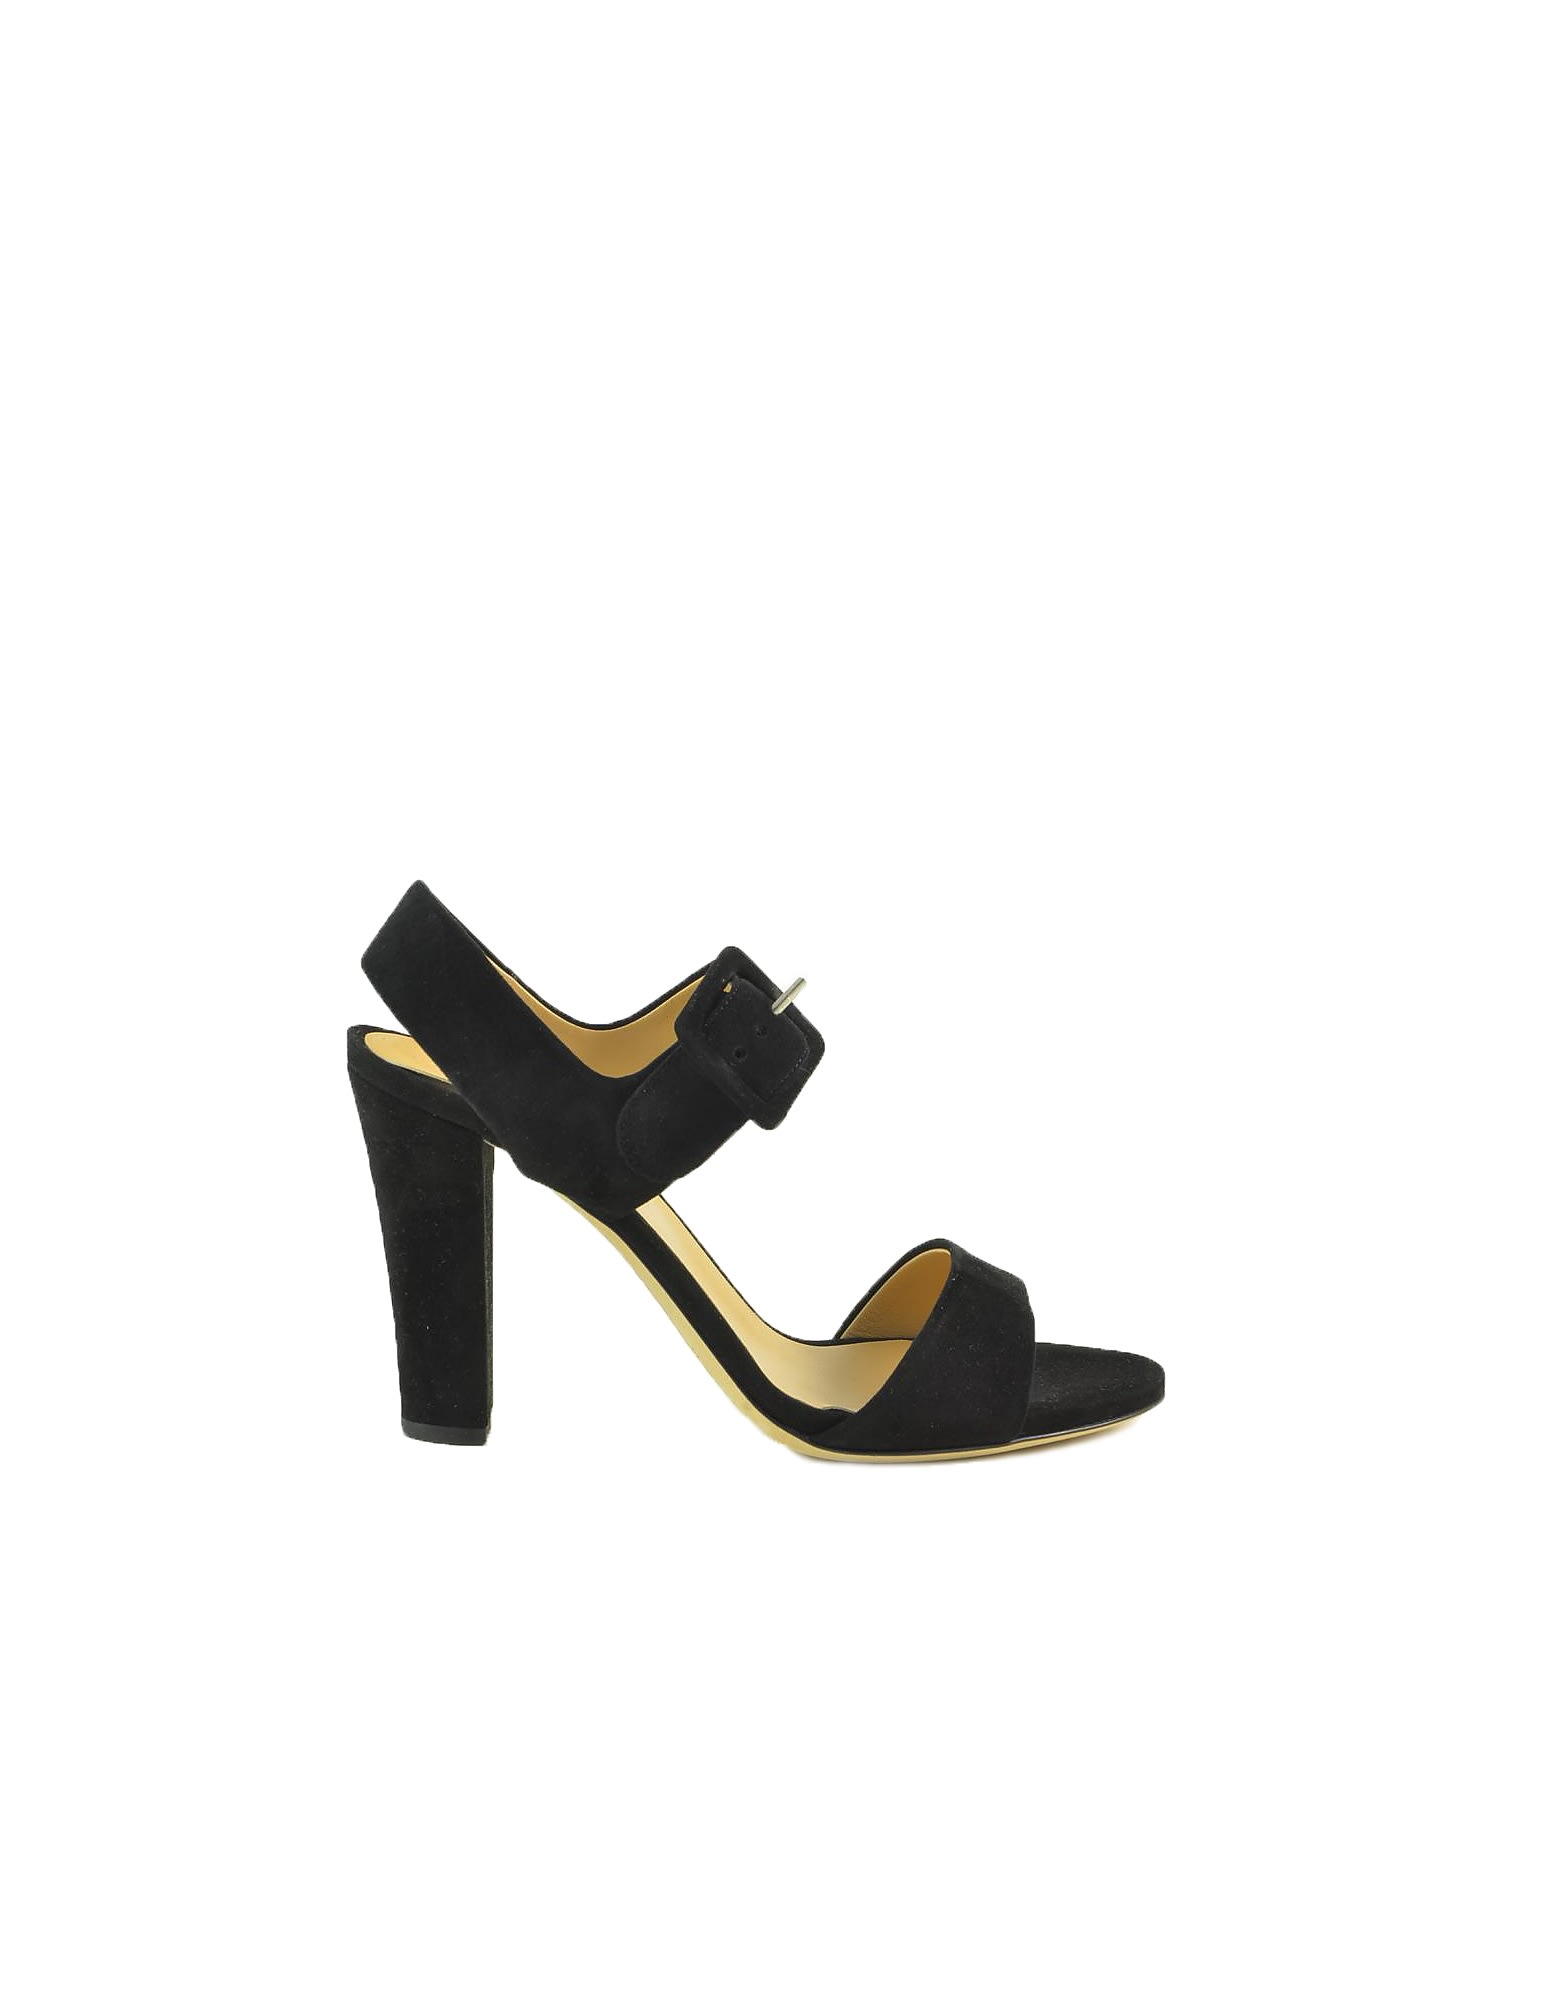 Buy Sergio Rossi Black Suede High Heel Sandals online, shop Sergio Rossi shoes with free shipping